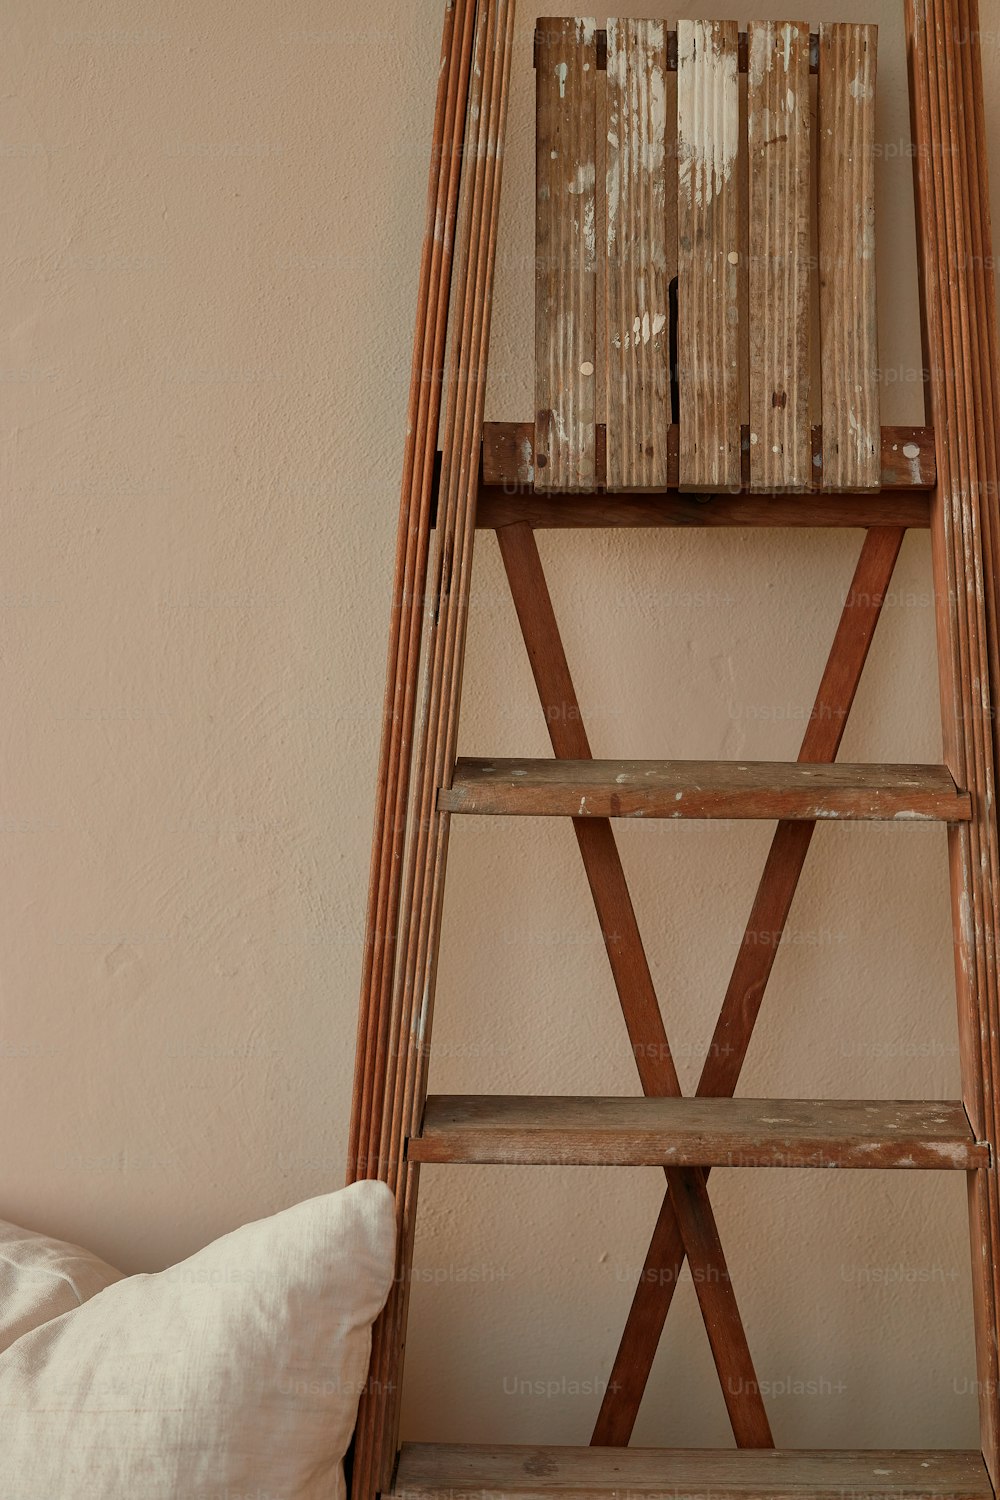 a wooden ladder leaning against a wall